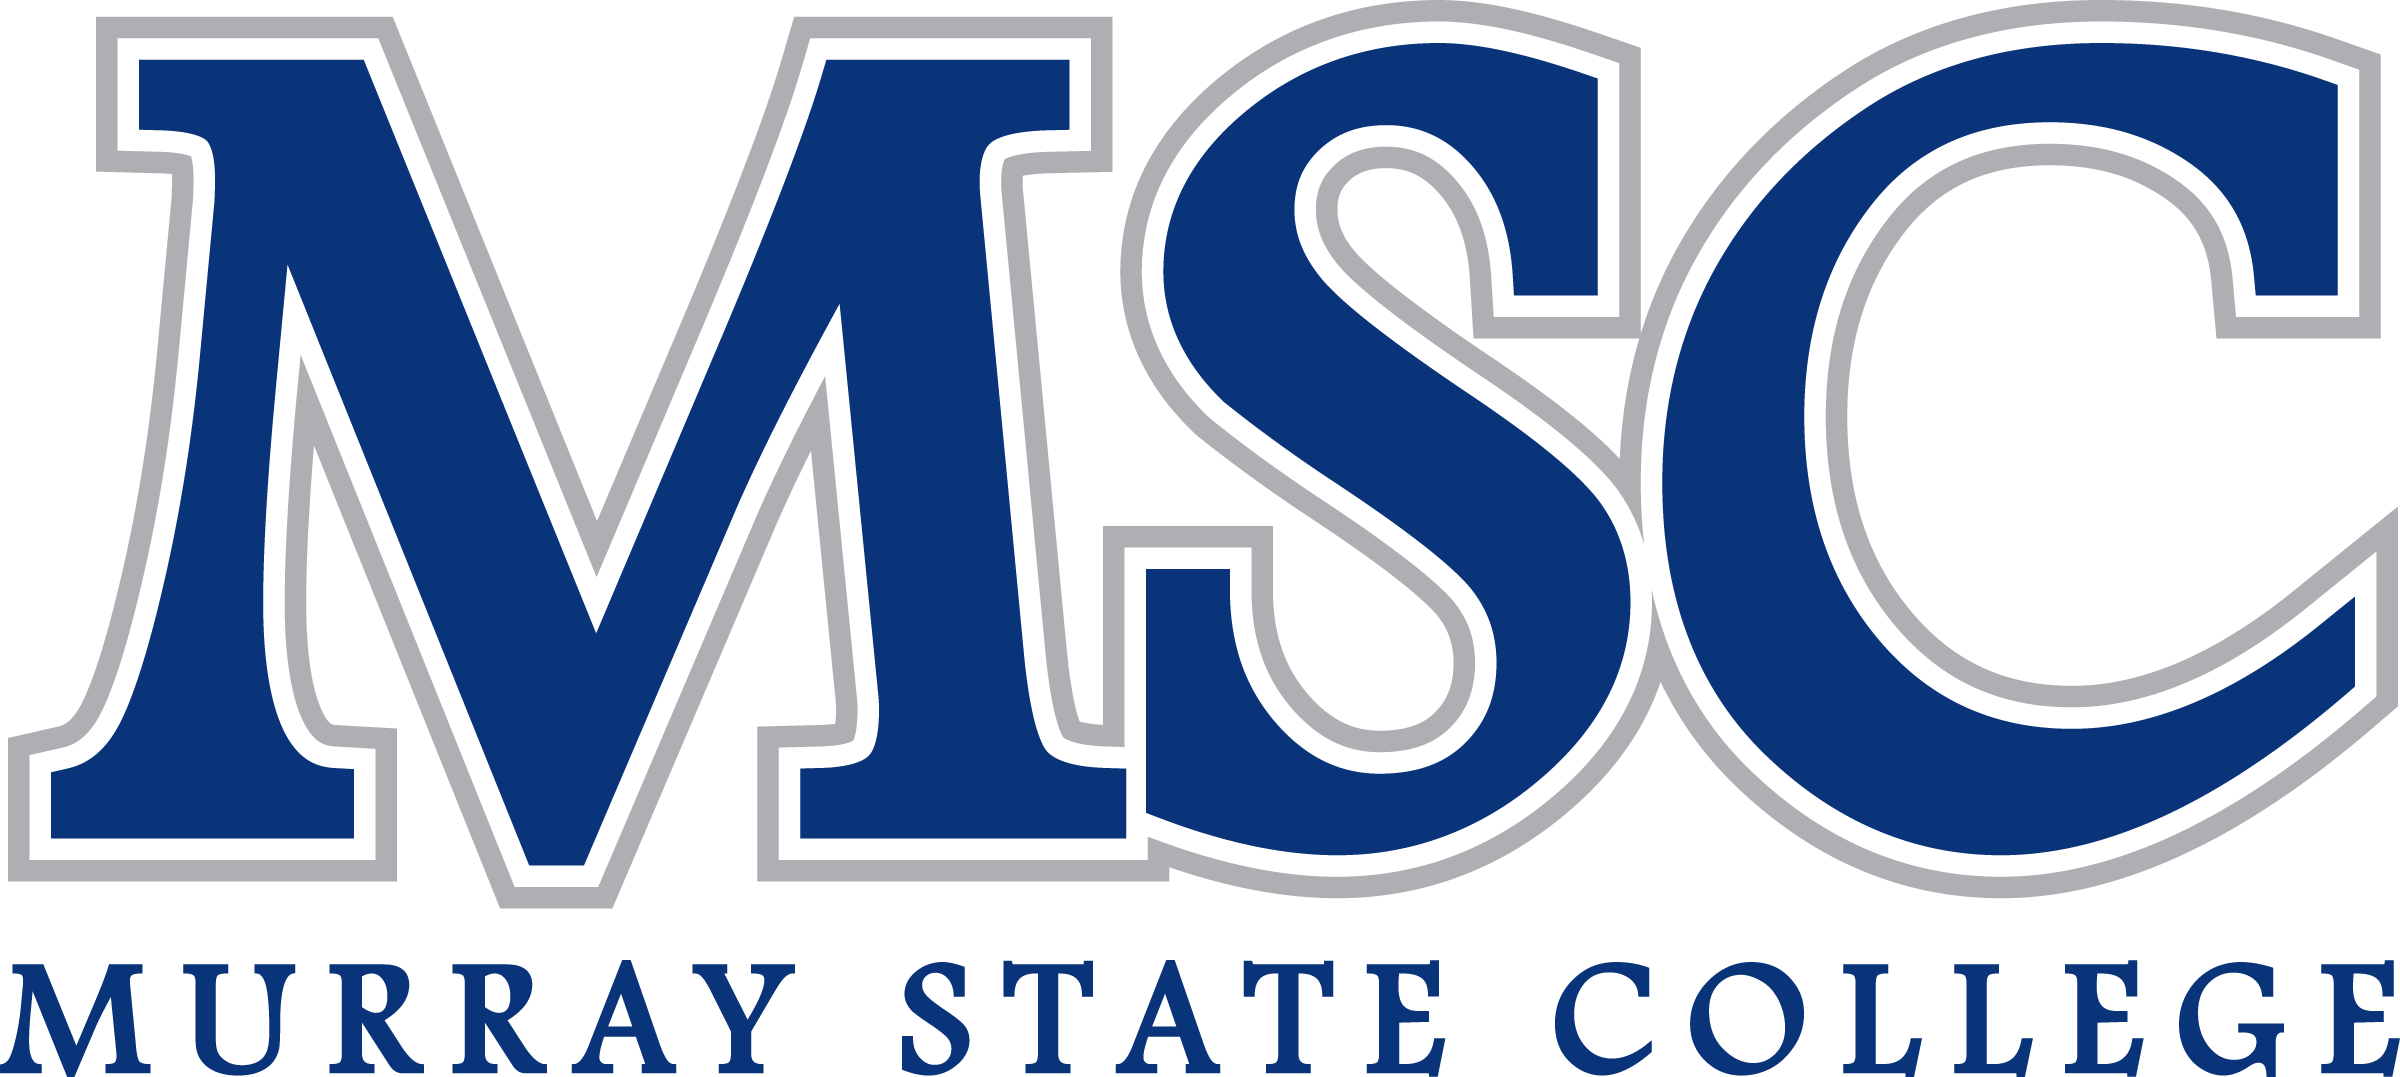 School logo for Murray State College in Tishomingo Ok